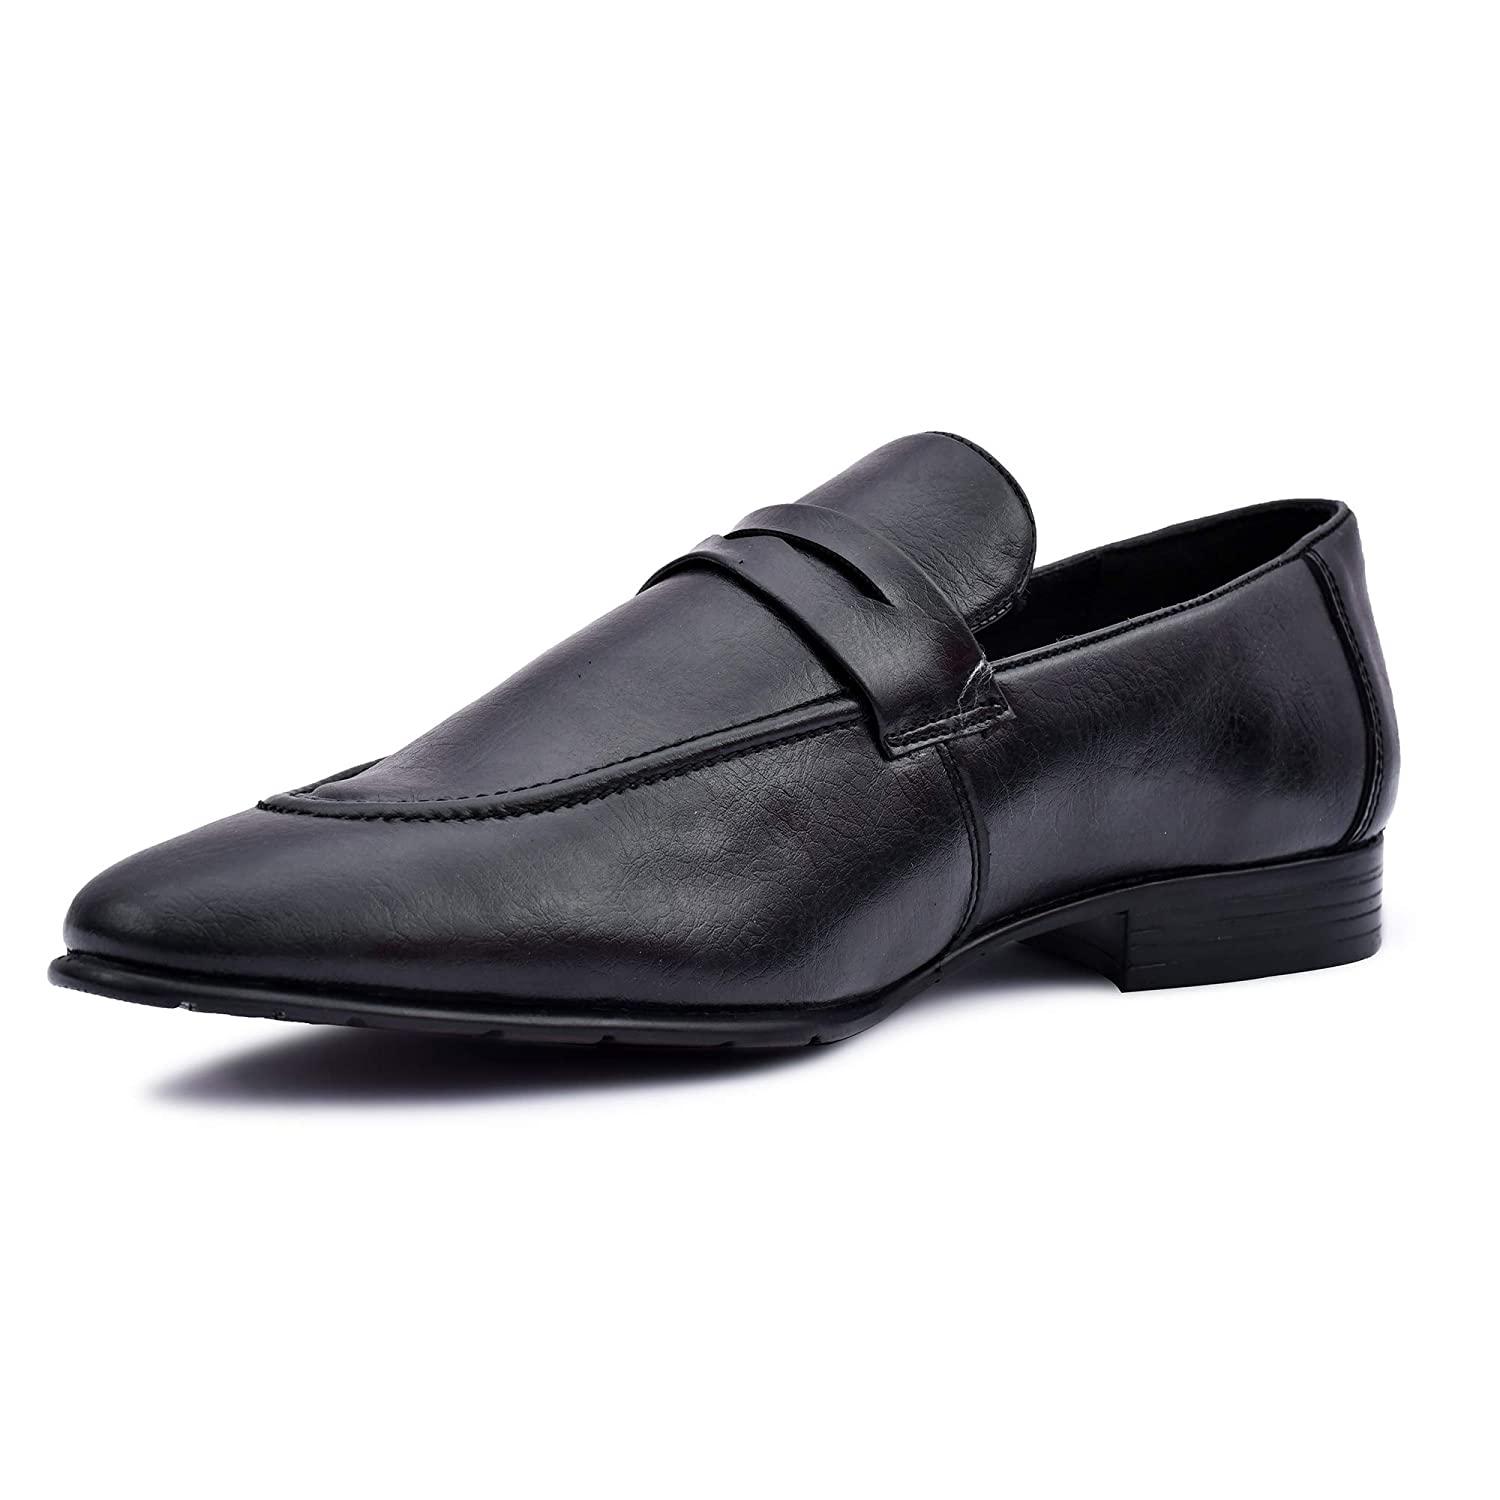 MAEVE & SHELBY Formal Ethnic Shoes for Men Premium Leather Shoes Office ...